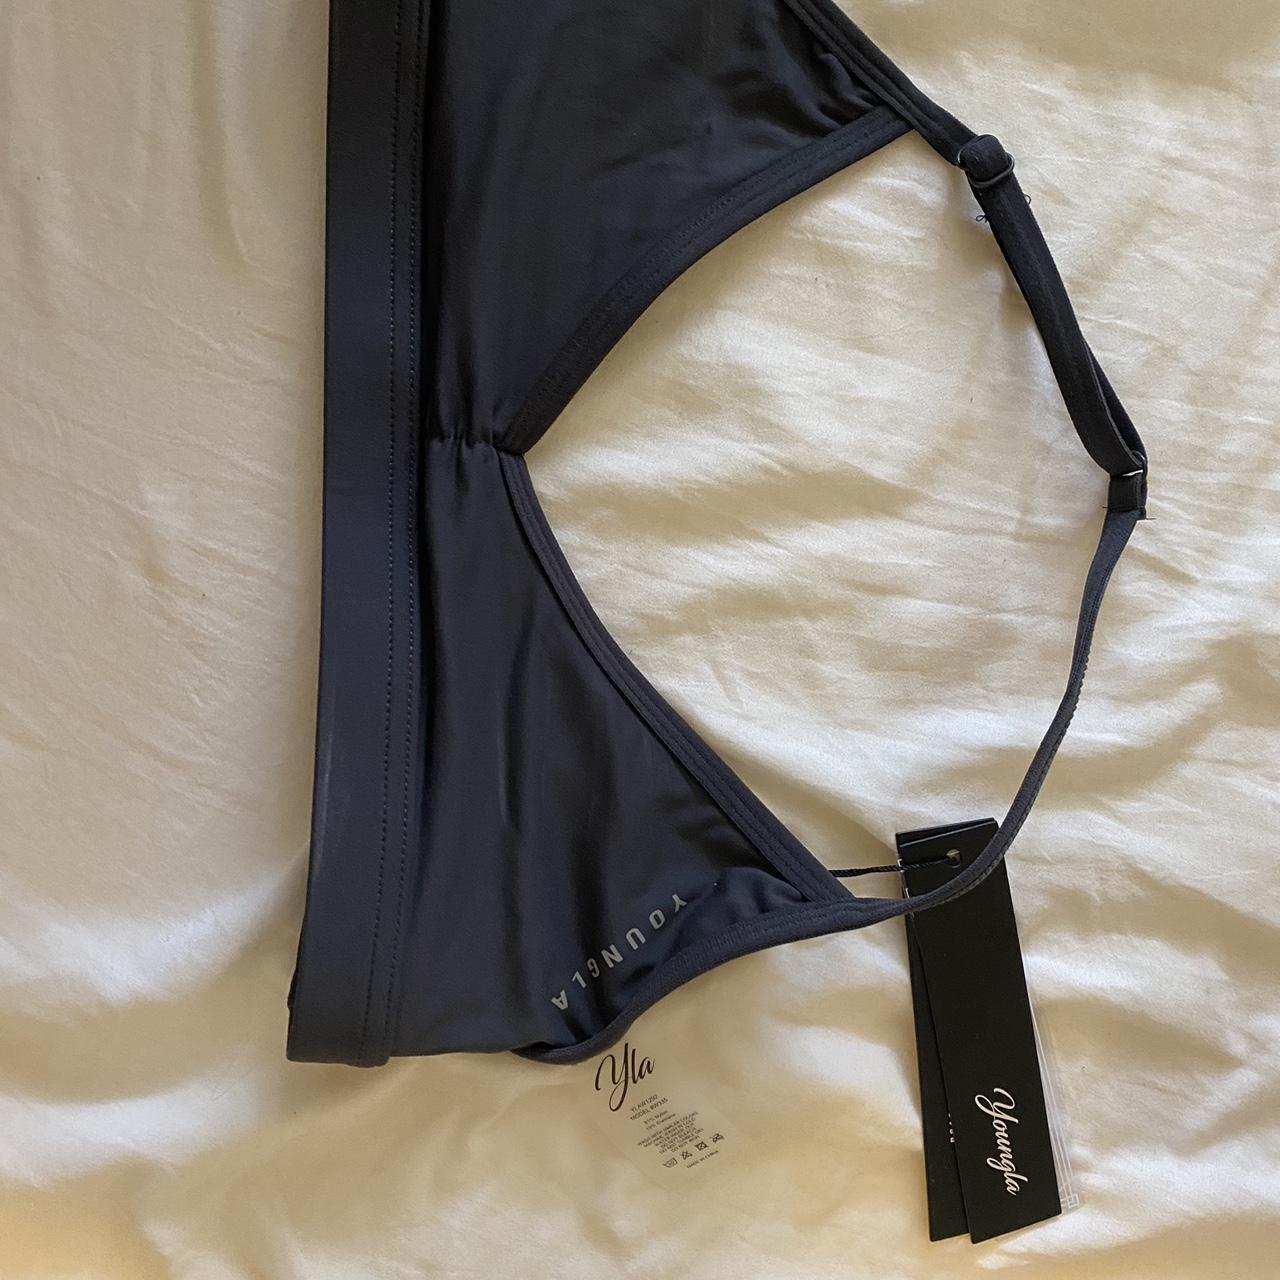 C9 Champion from Target Sports Bra #exercise #workout - Depop